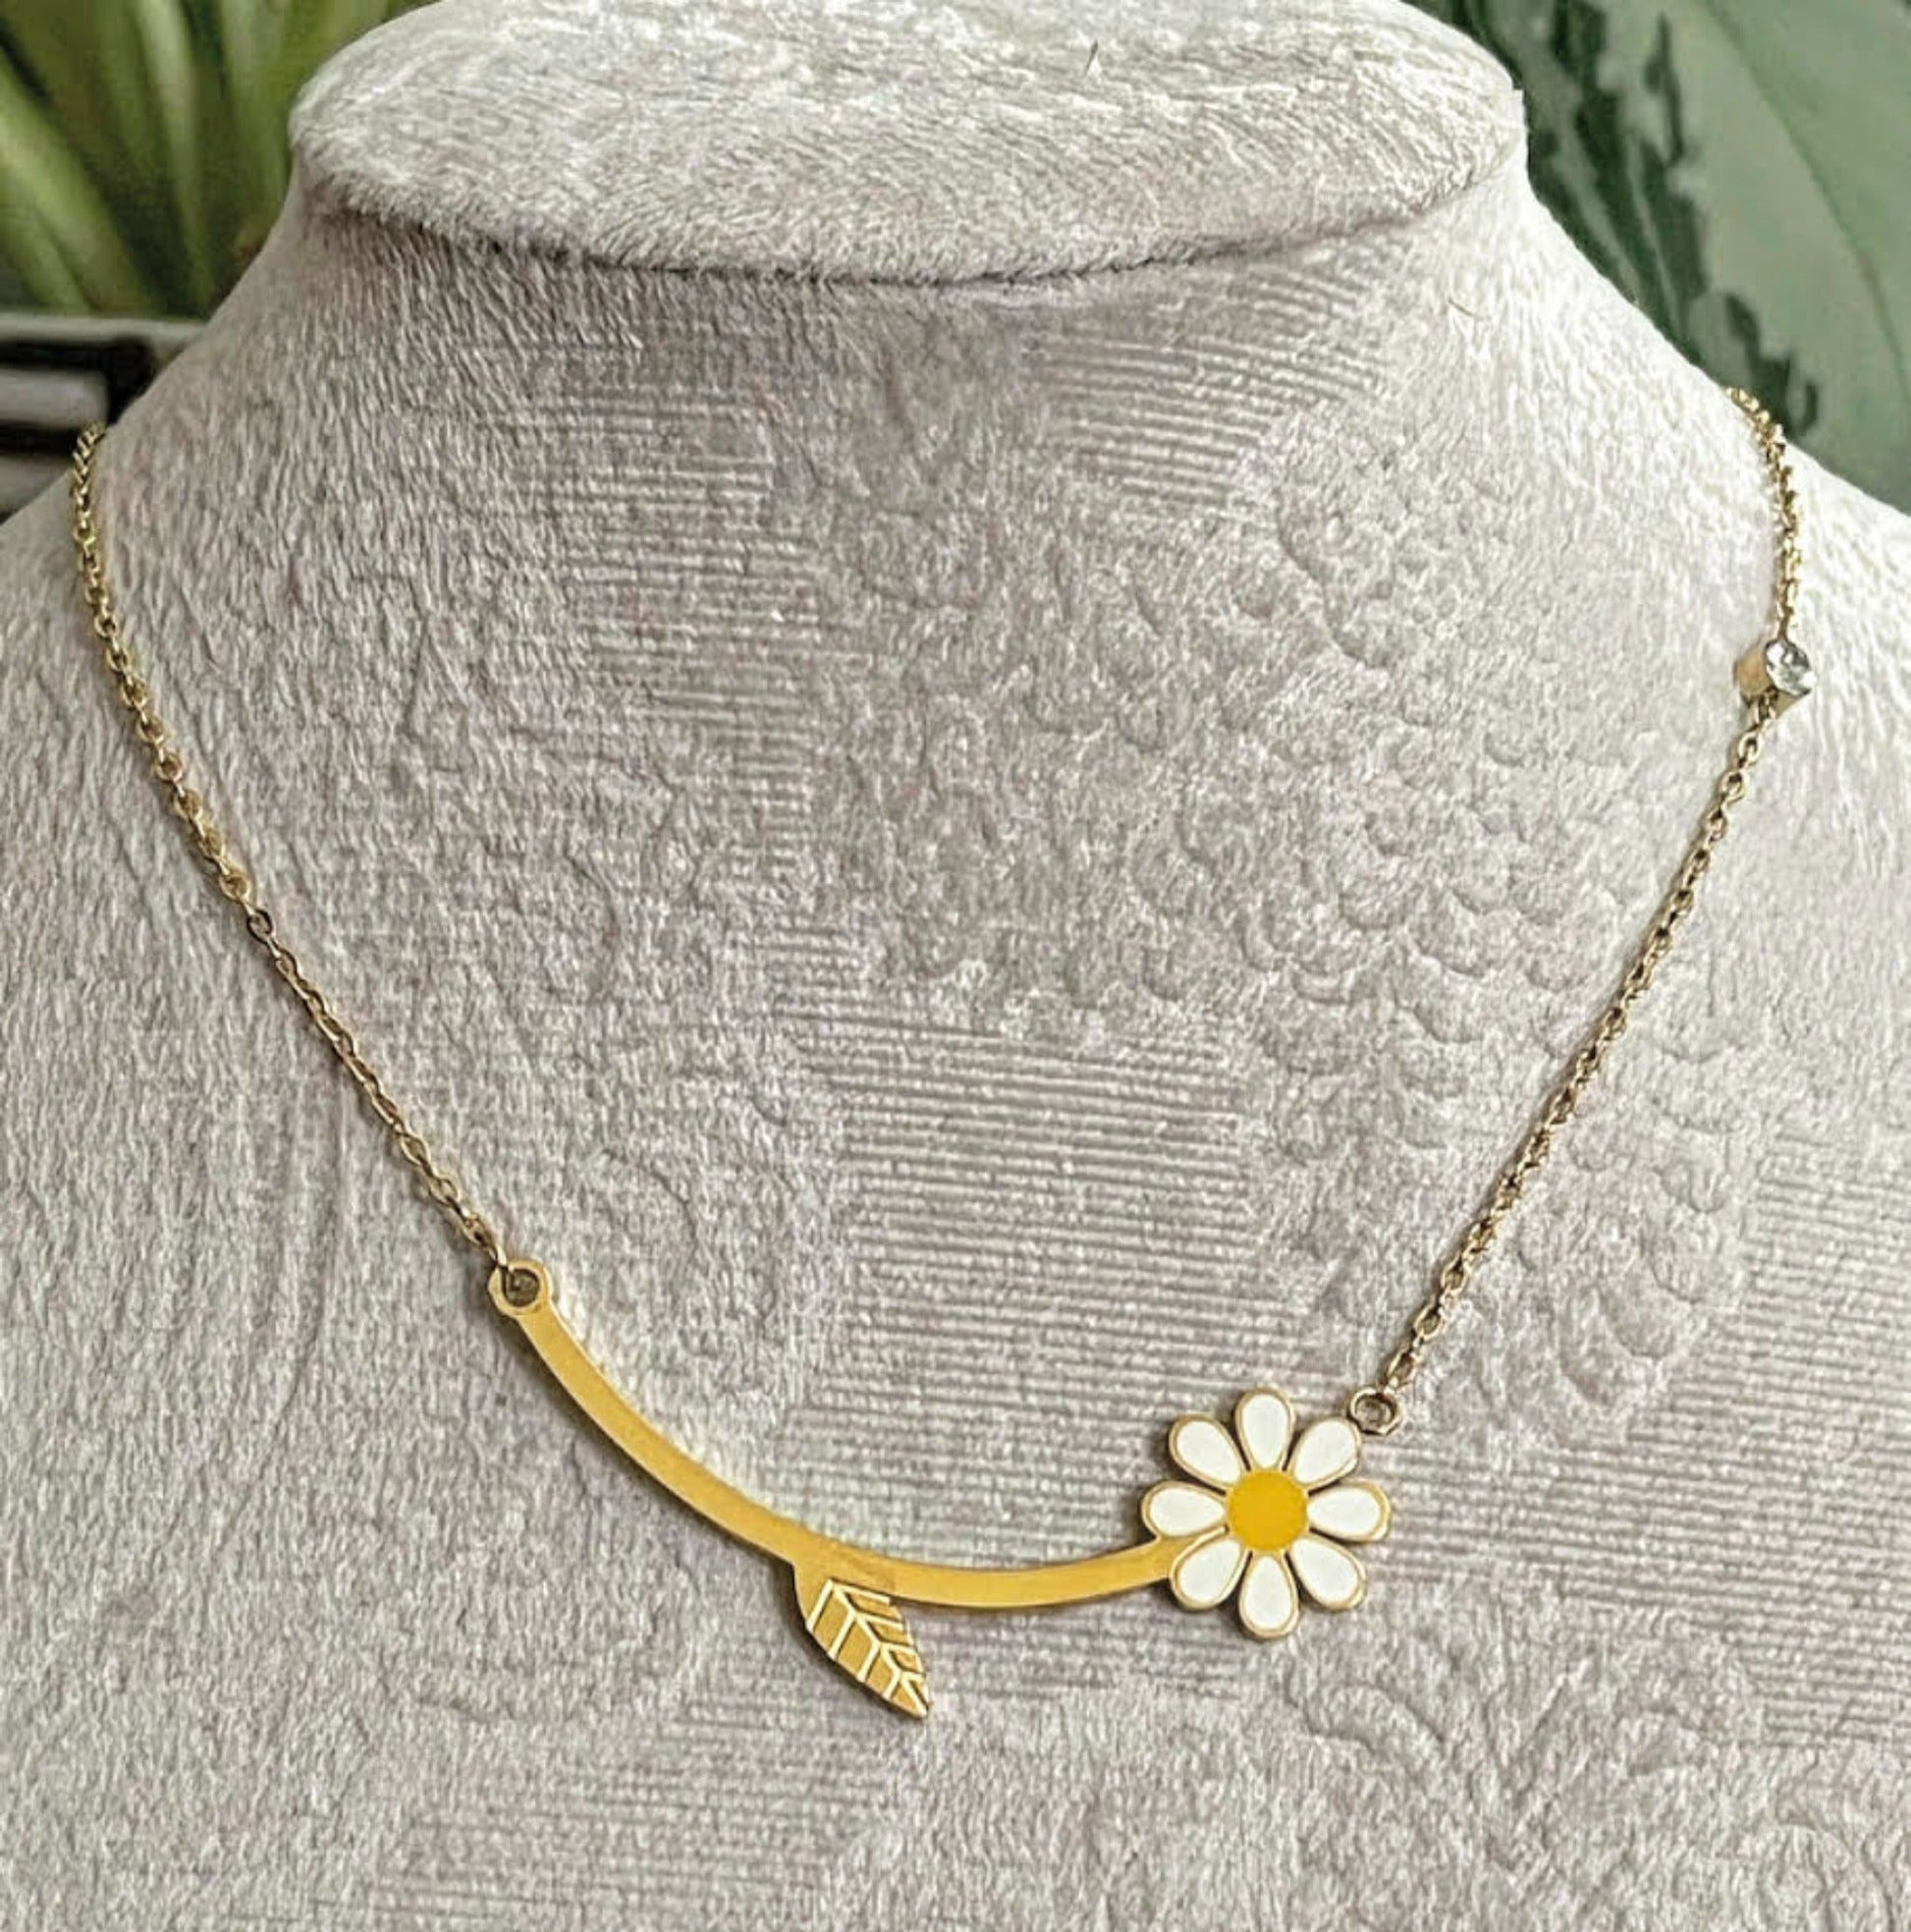 Vintage Sunflower Daisy Necklace Ladies Simple Multicolor Clavicle Chain Necklace  Necklace Wedding Bridal Party Fashion Jewelry